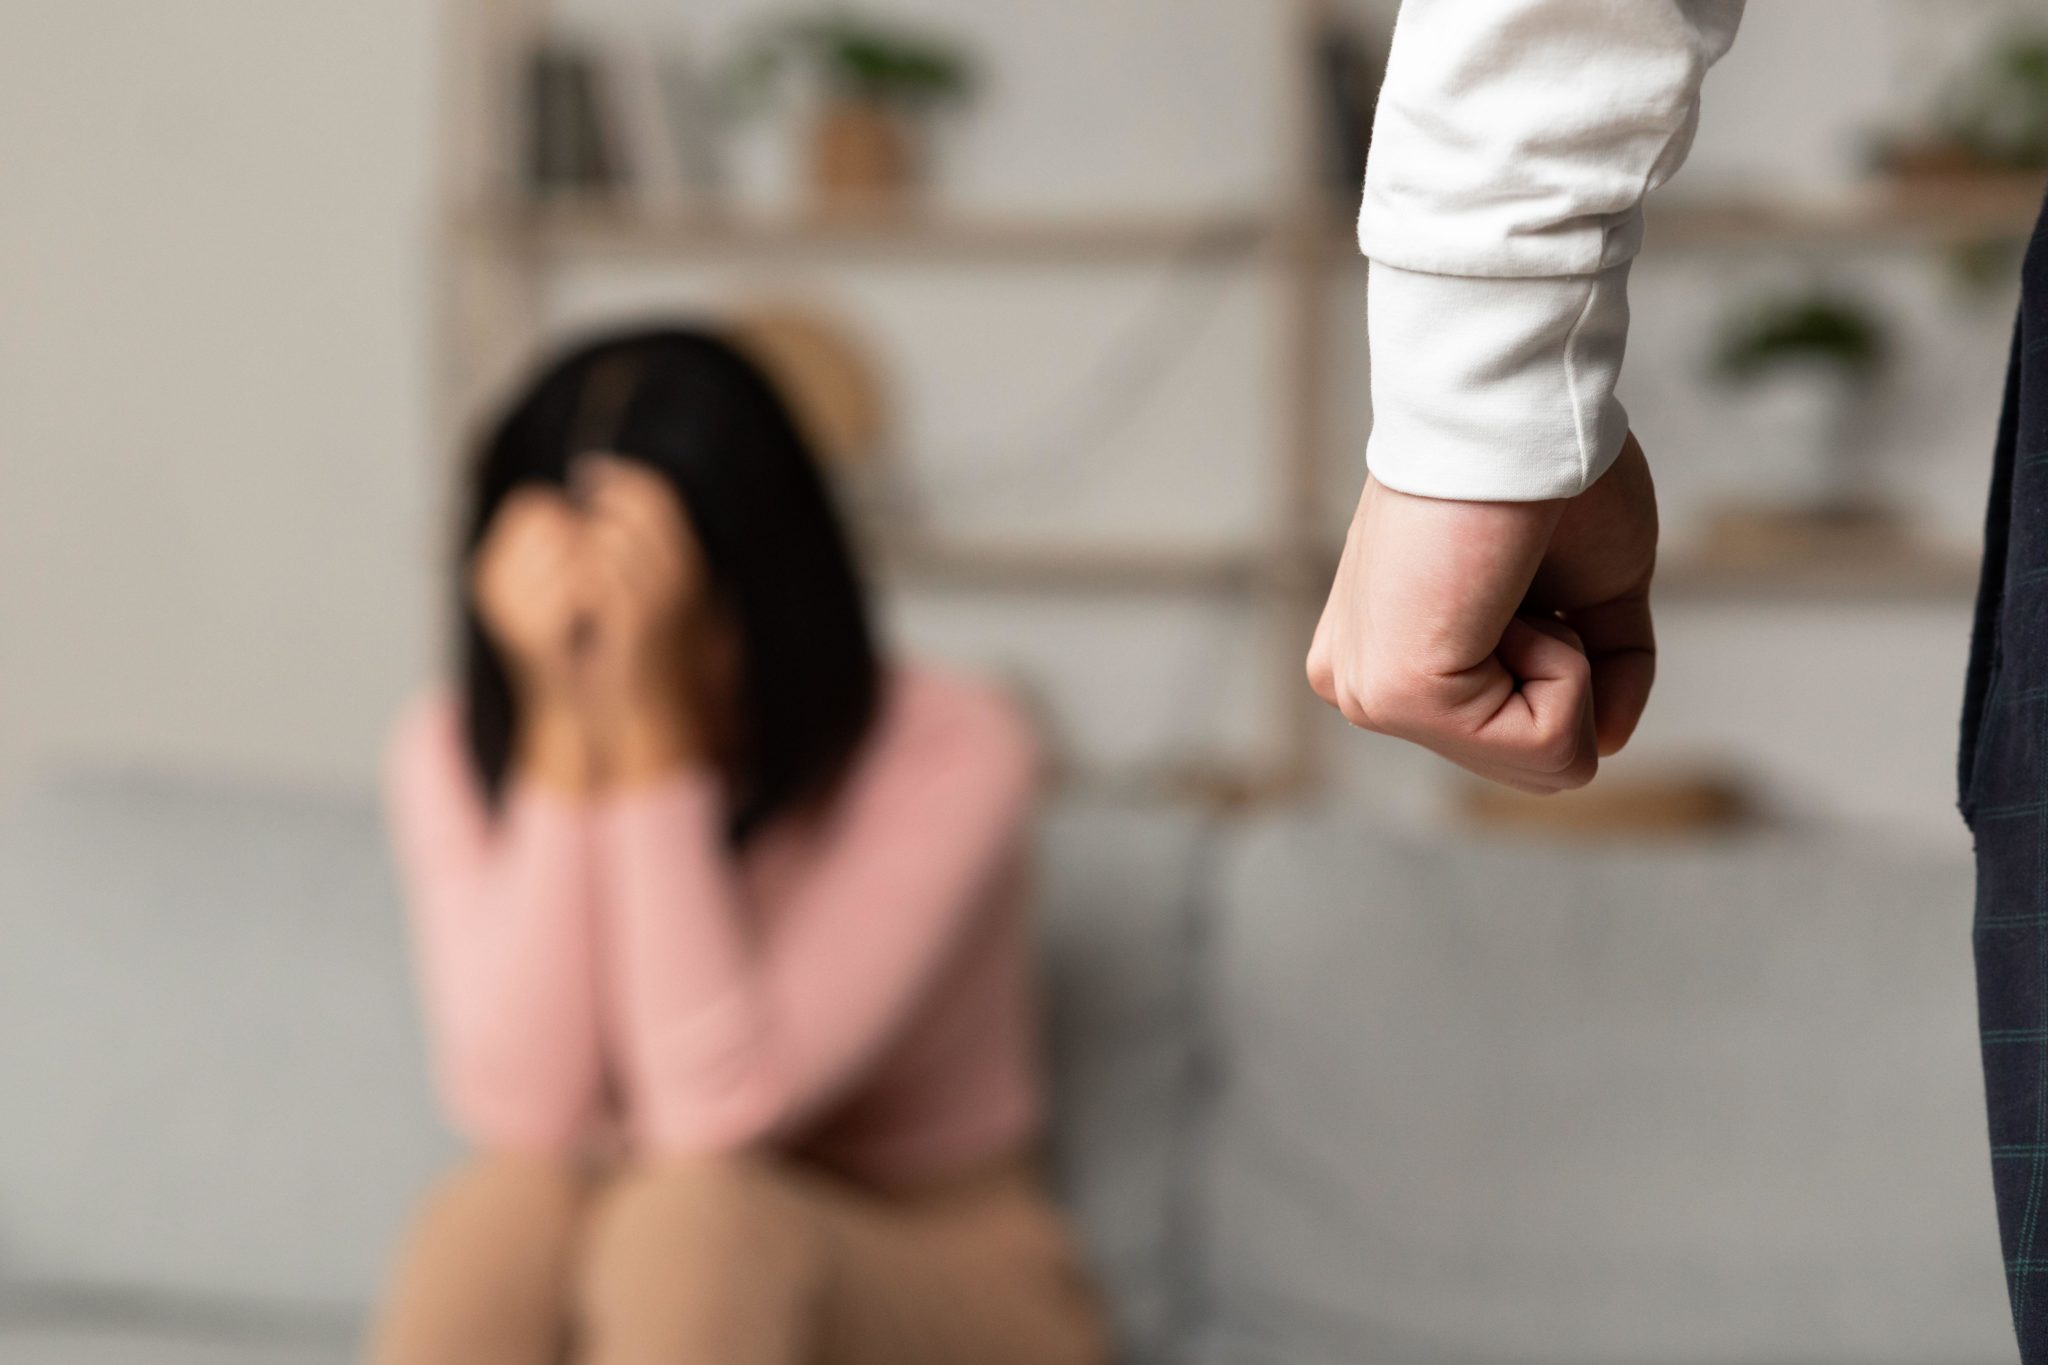 Staged file photo depicts a domestic violence situation.